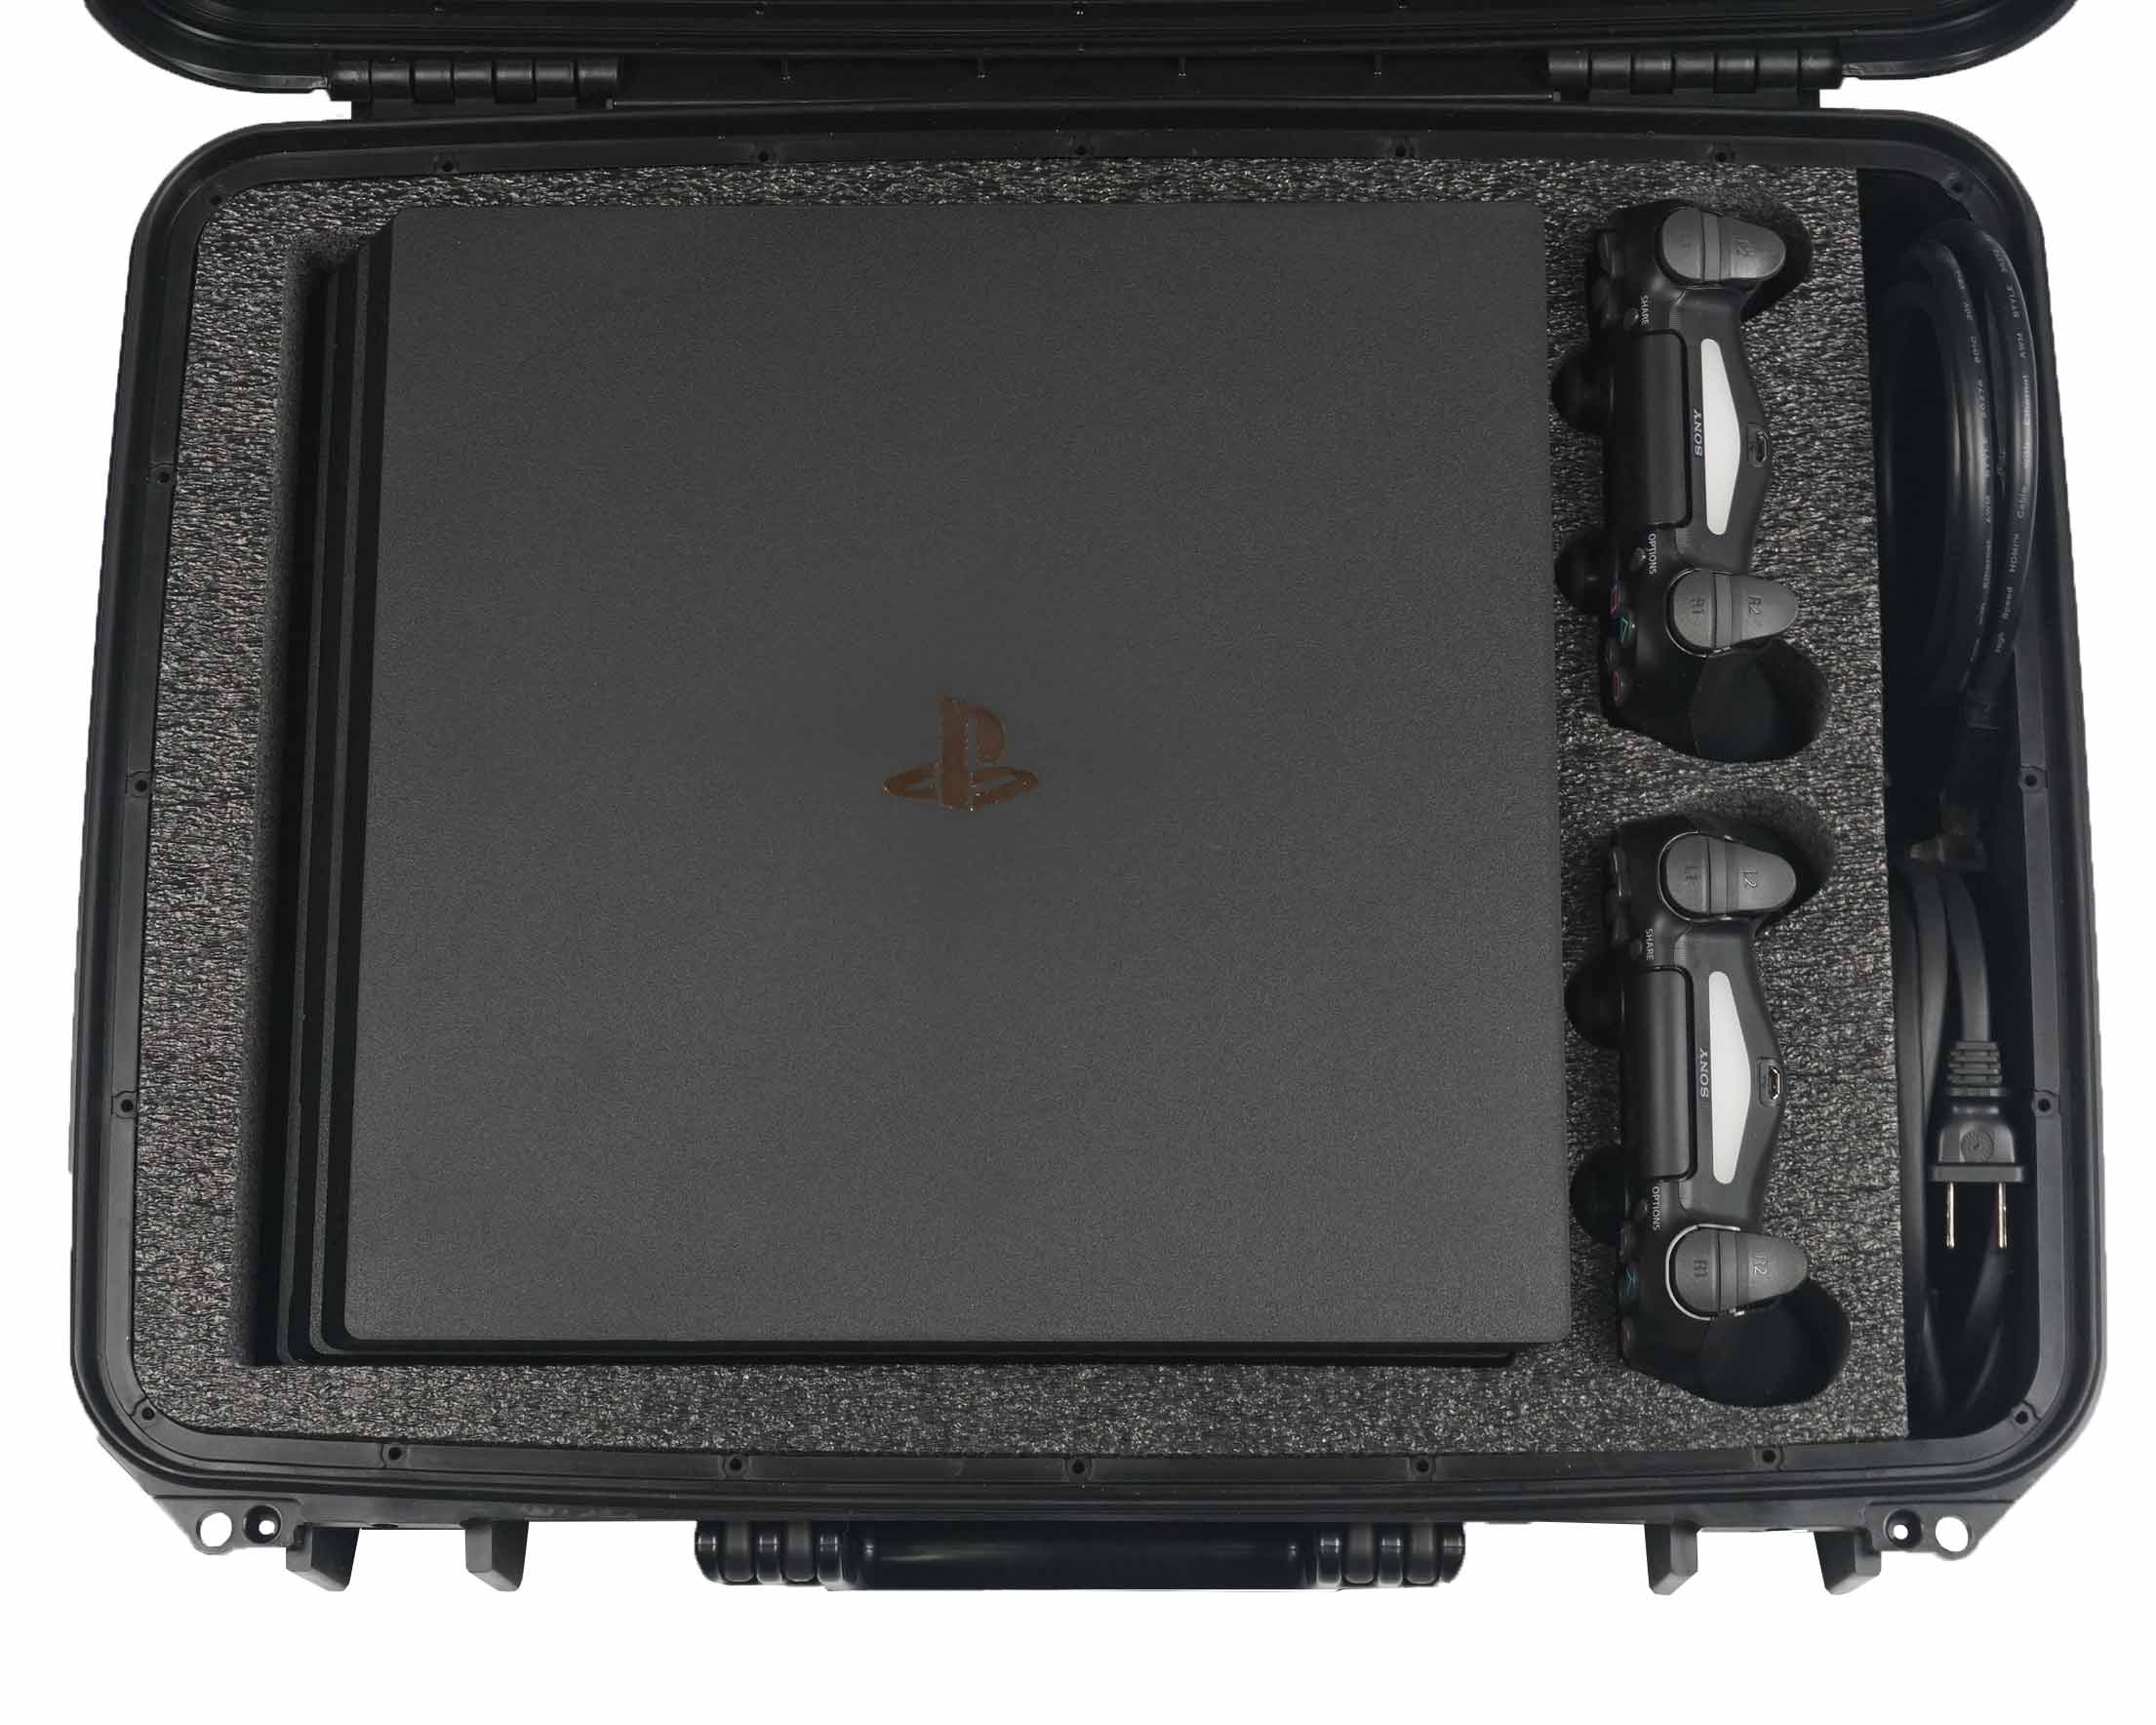 ps4 in case